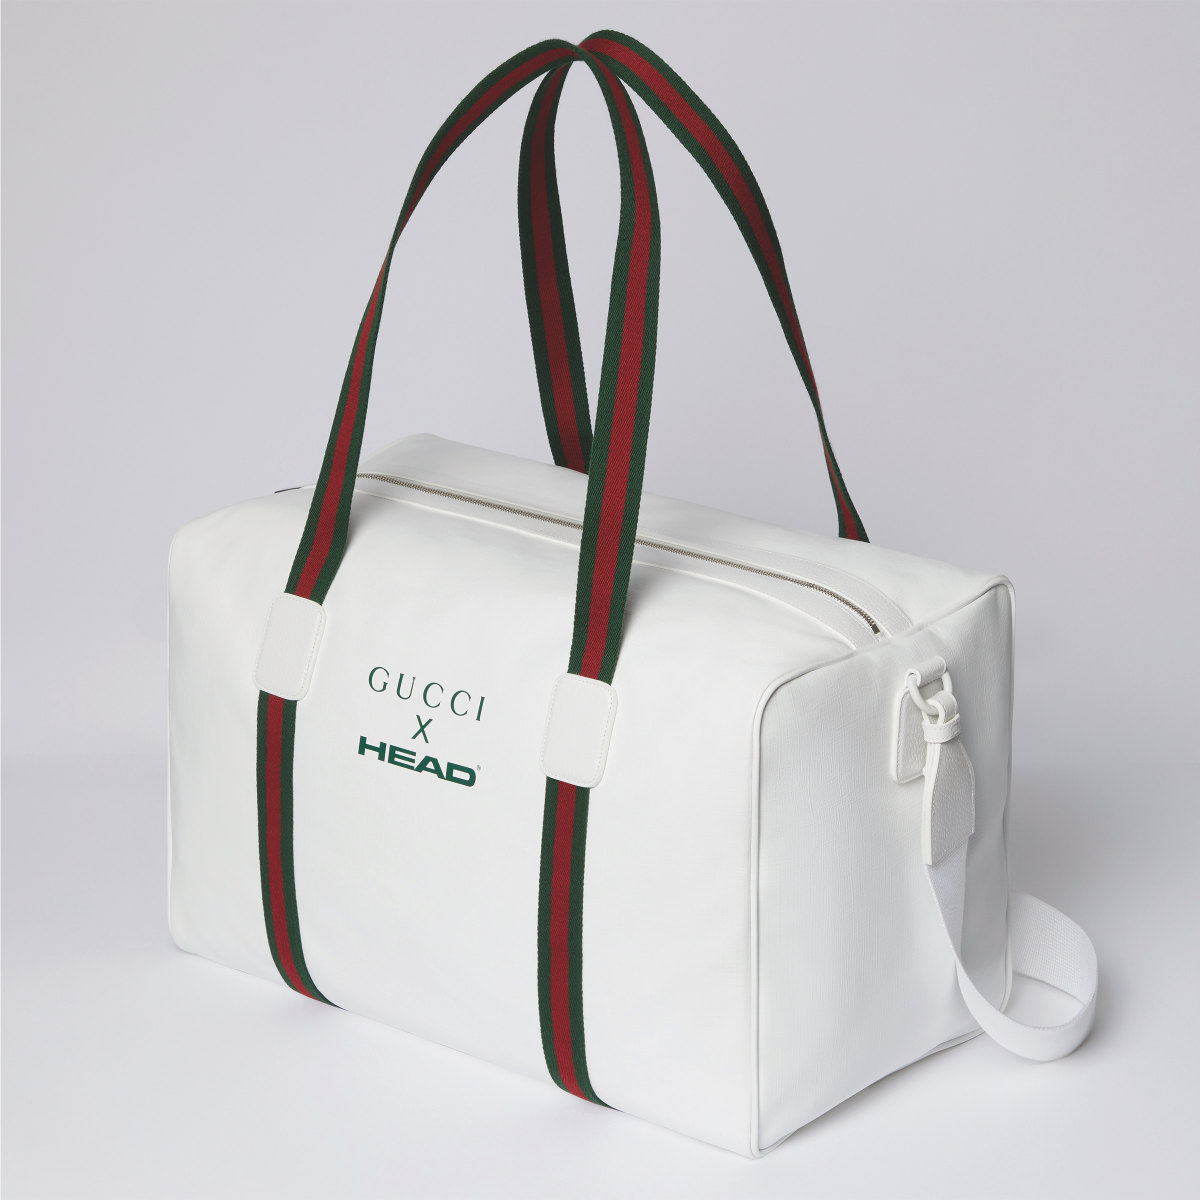 Gucci Teams Up With Head For Jannik Sinner’s New Duffle Bag Debuting At Roland Garros